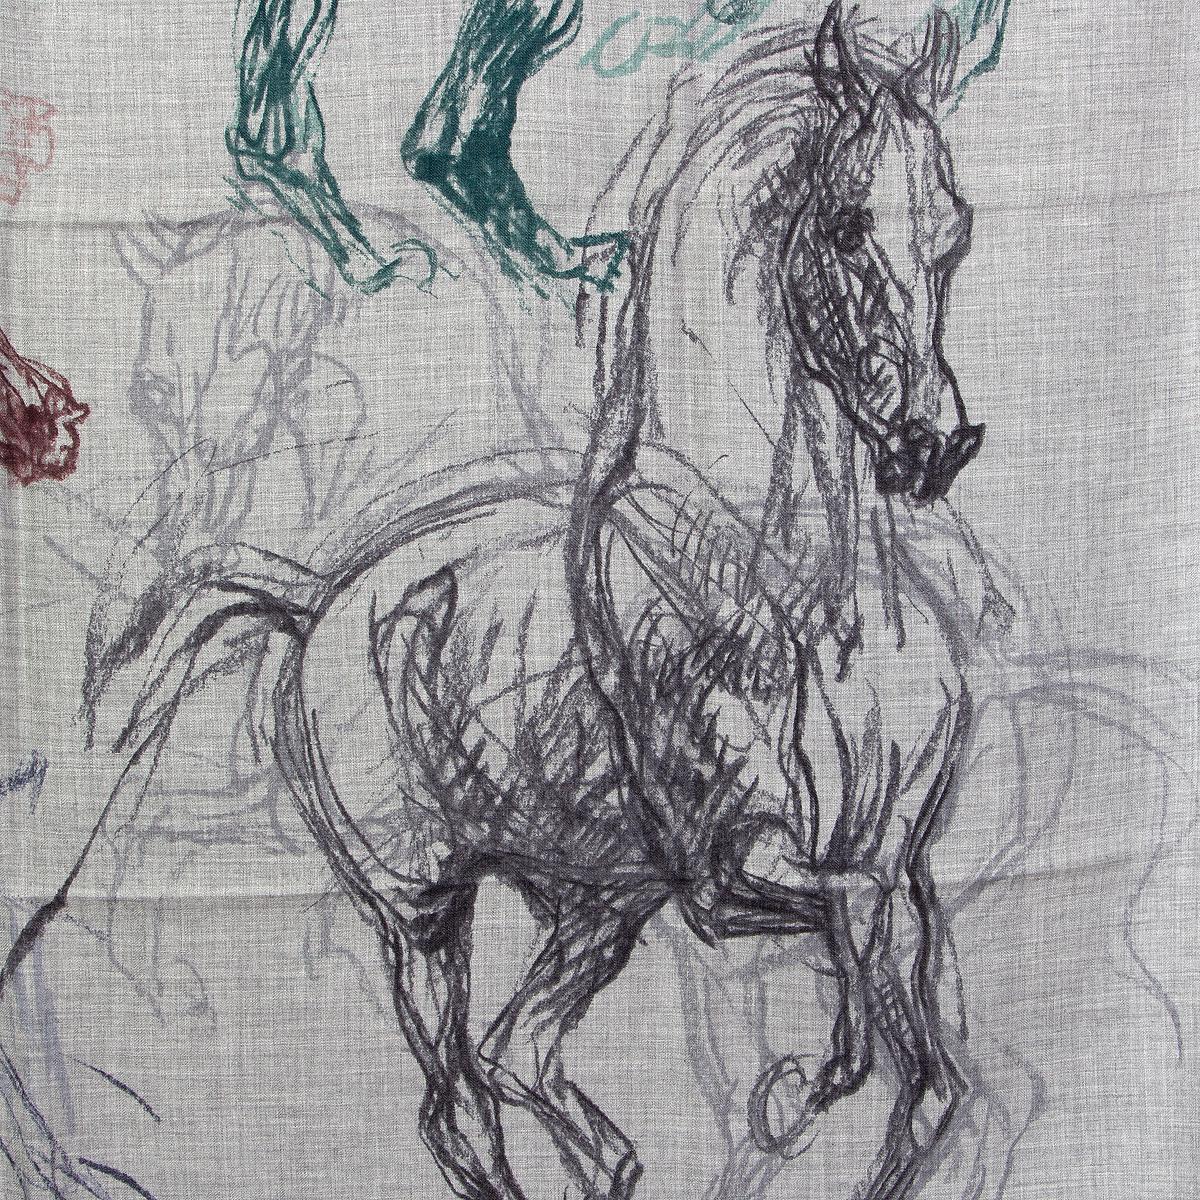 100% authentic Hermes 'Pirouette au Galop 140' shawl by Jean-Louis Sauvat in grey cashmere (70%) and silk (30%) with contrast dark green hem and details in dark green and anthracite. Brand new.

Width 140cm (54.6in)
Height 140cm (54.6in)